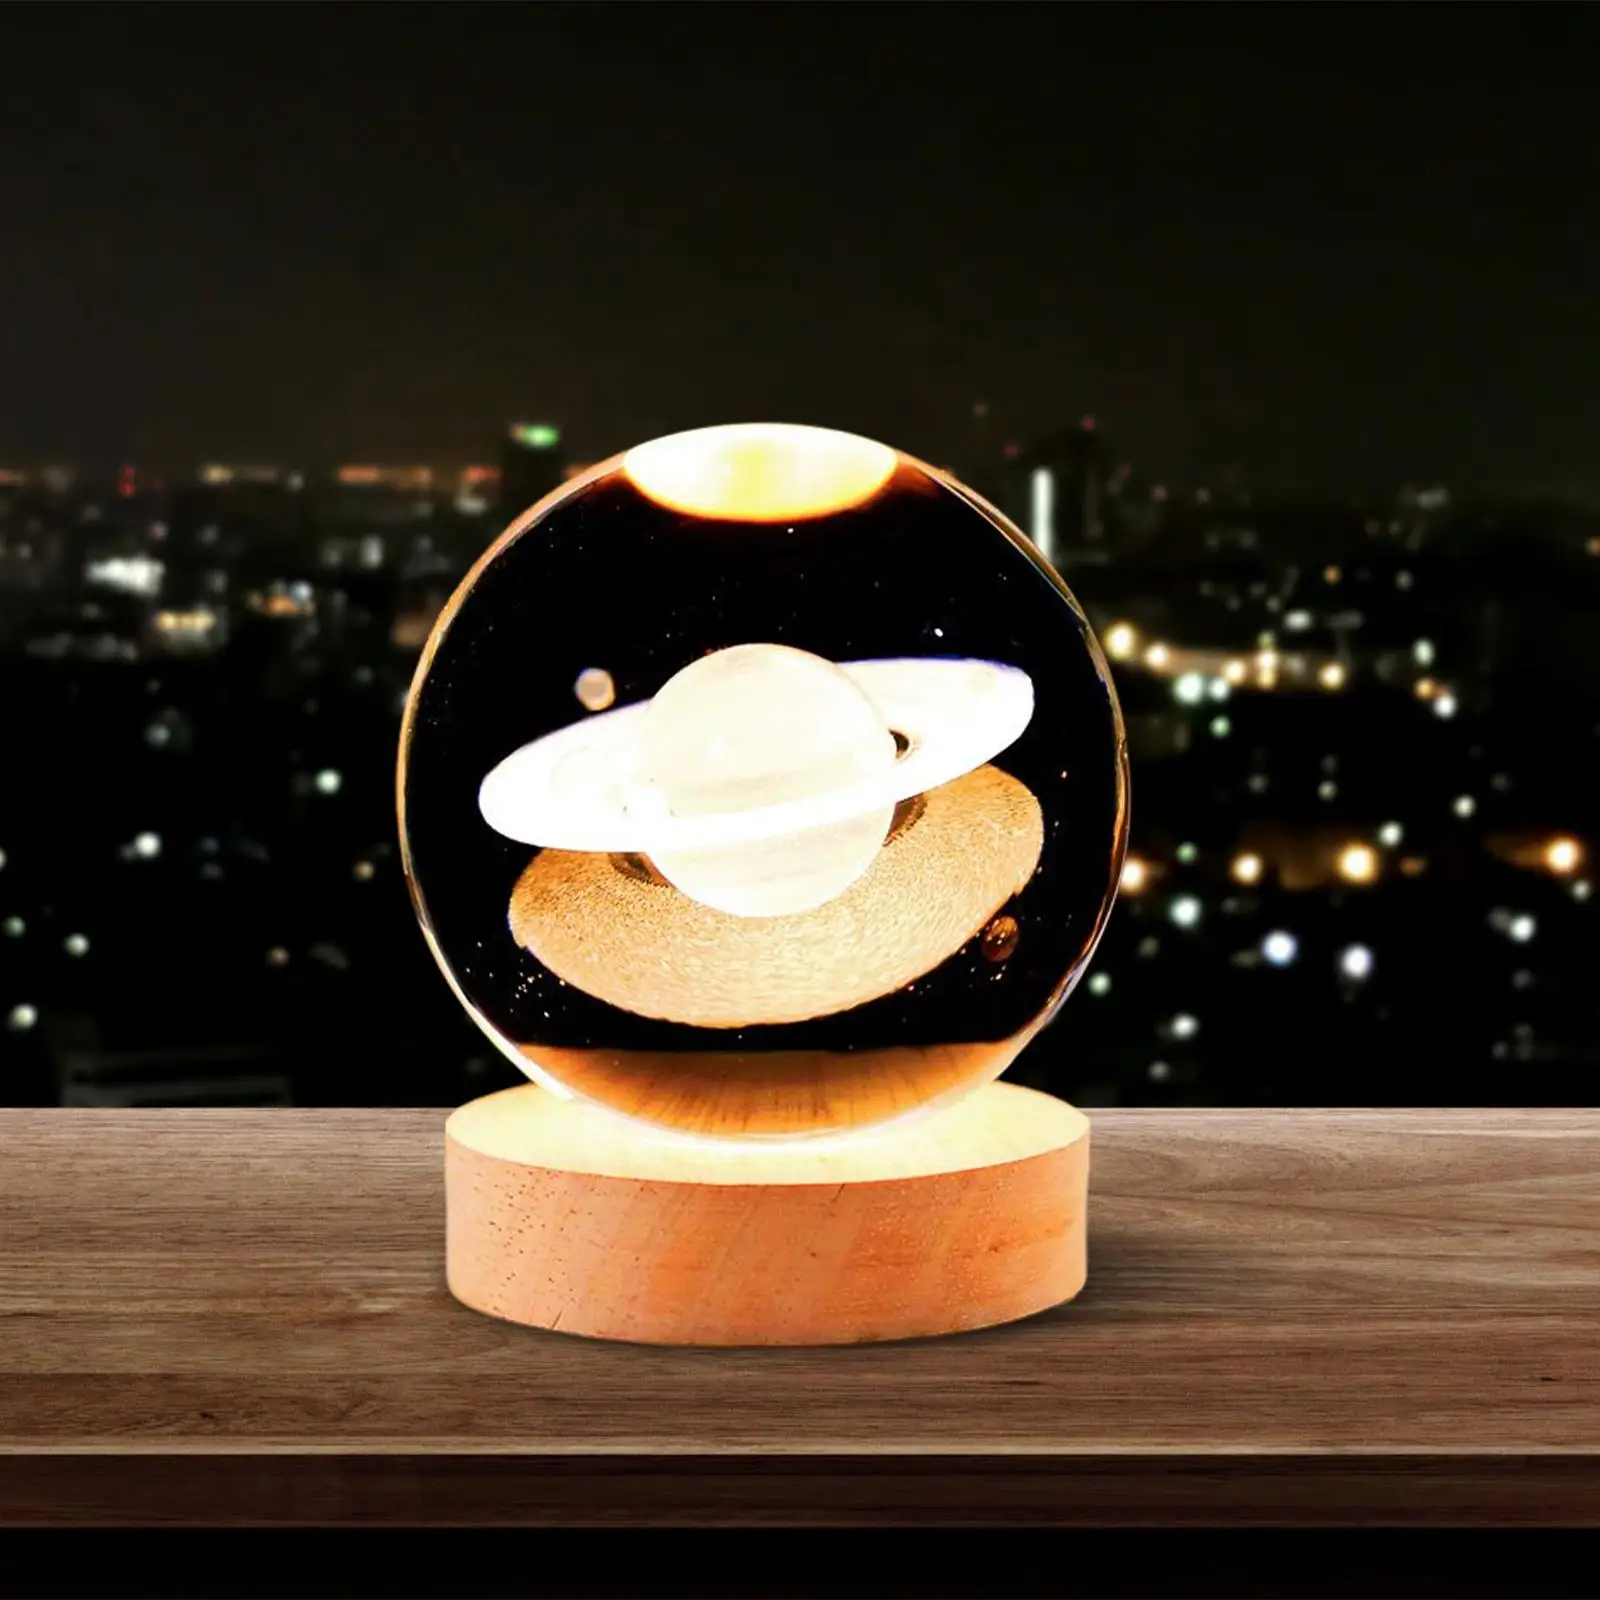 LED Sphere Lamps 2.4inch Home Decoration Wooden Base Ornament 3D Night Light for Birthday Anniversary Bedside Bedroom Desk